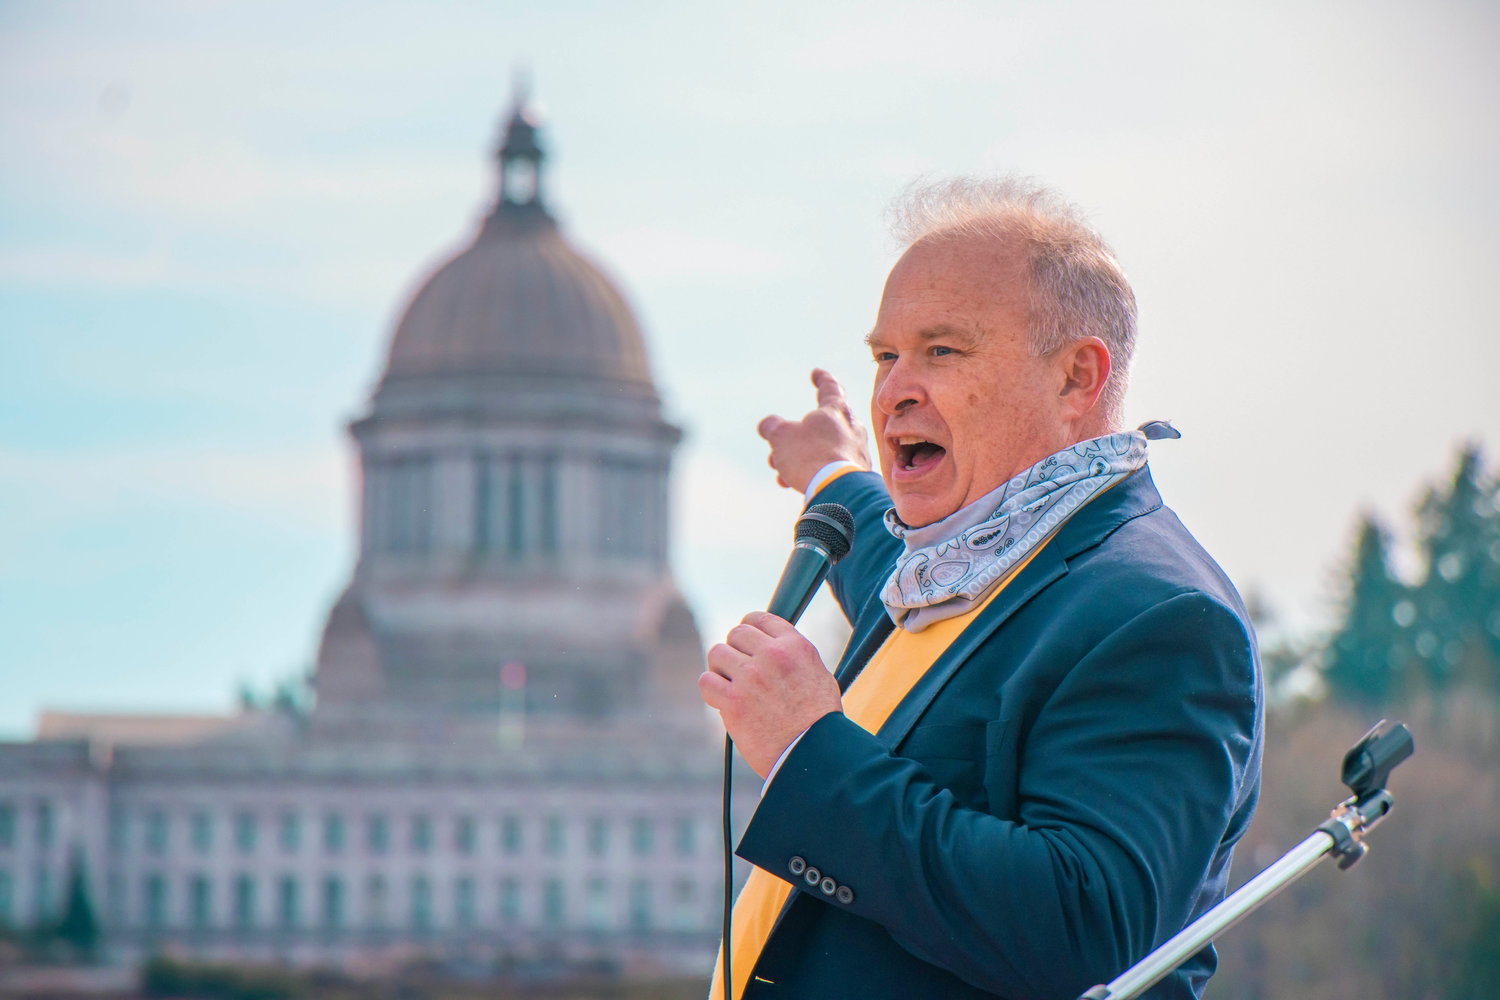 State Rep. Jim Walsh points to the Washington State Capitol during a rally in support of bringing back in-person schooling near Capitol Lake earlier this month in Olympia.